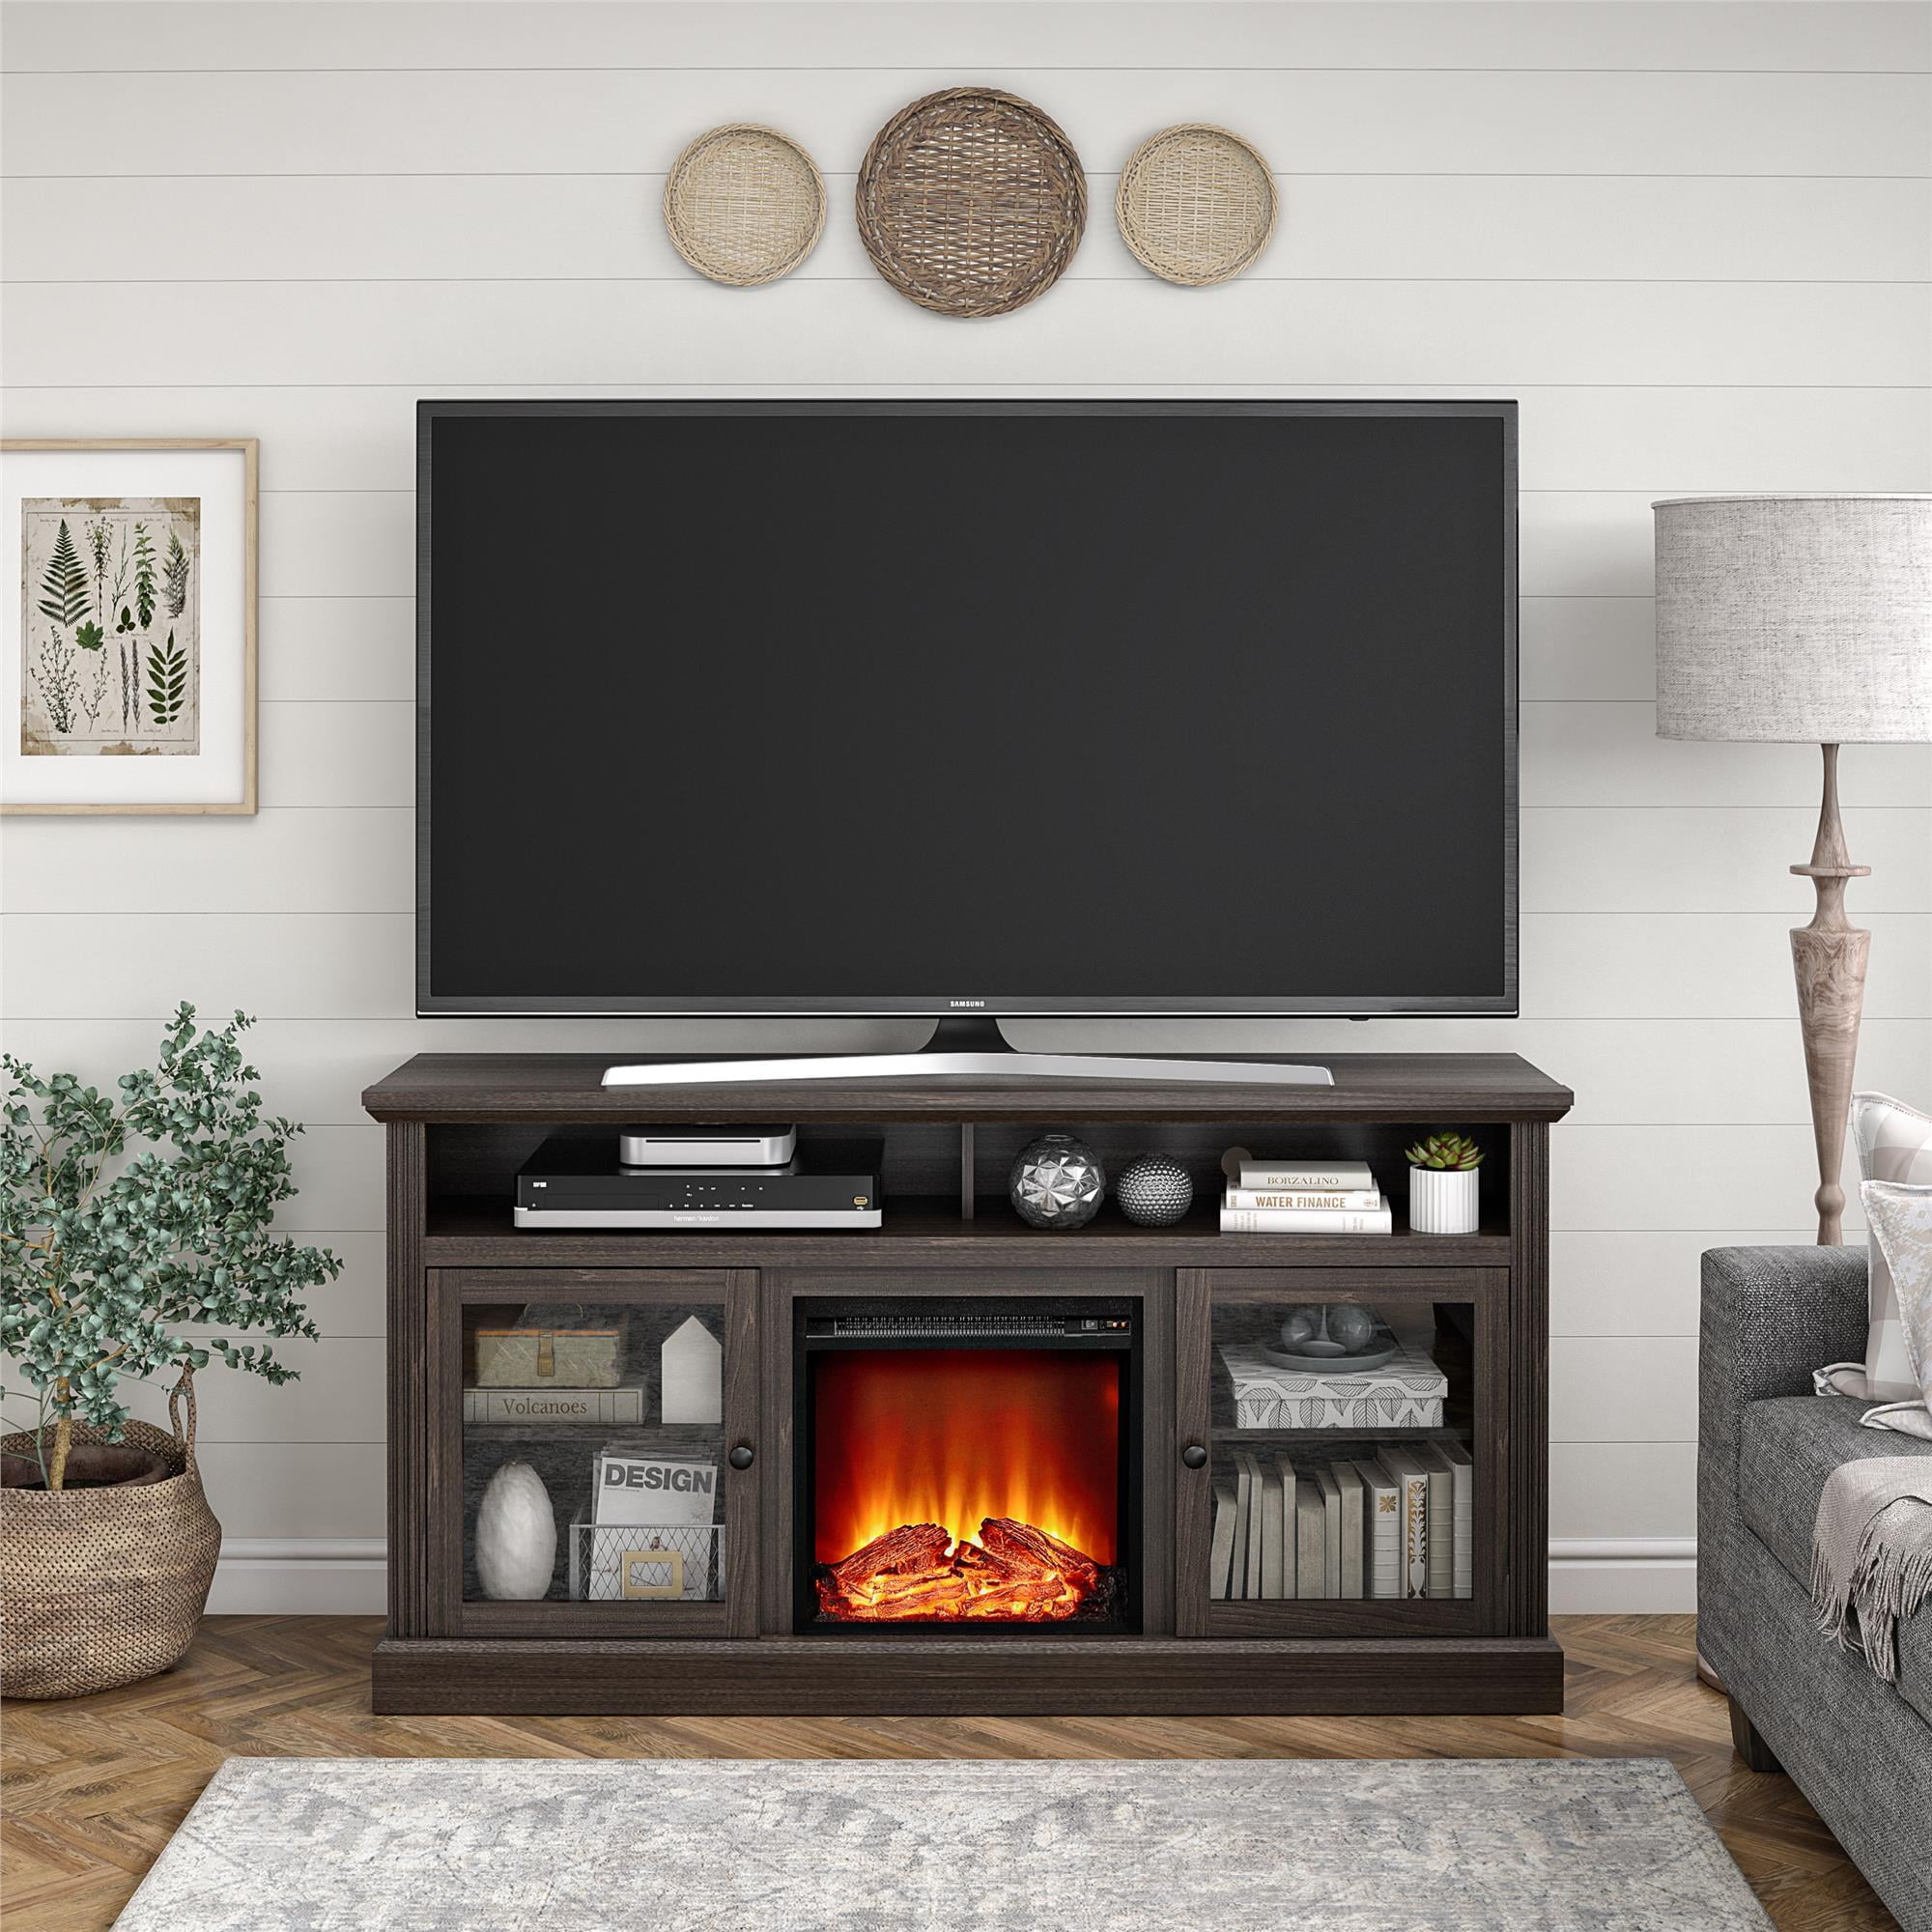 Ameriwood Home Leesburg Fireplace TV Stand for TVs up to 65", Espresso